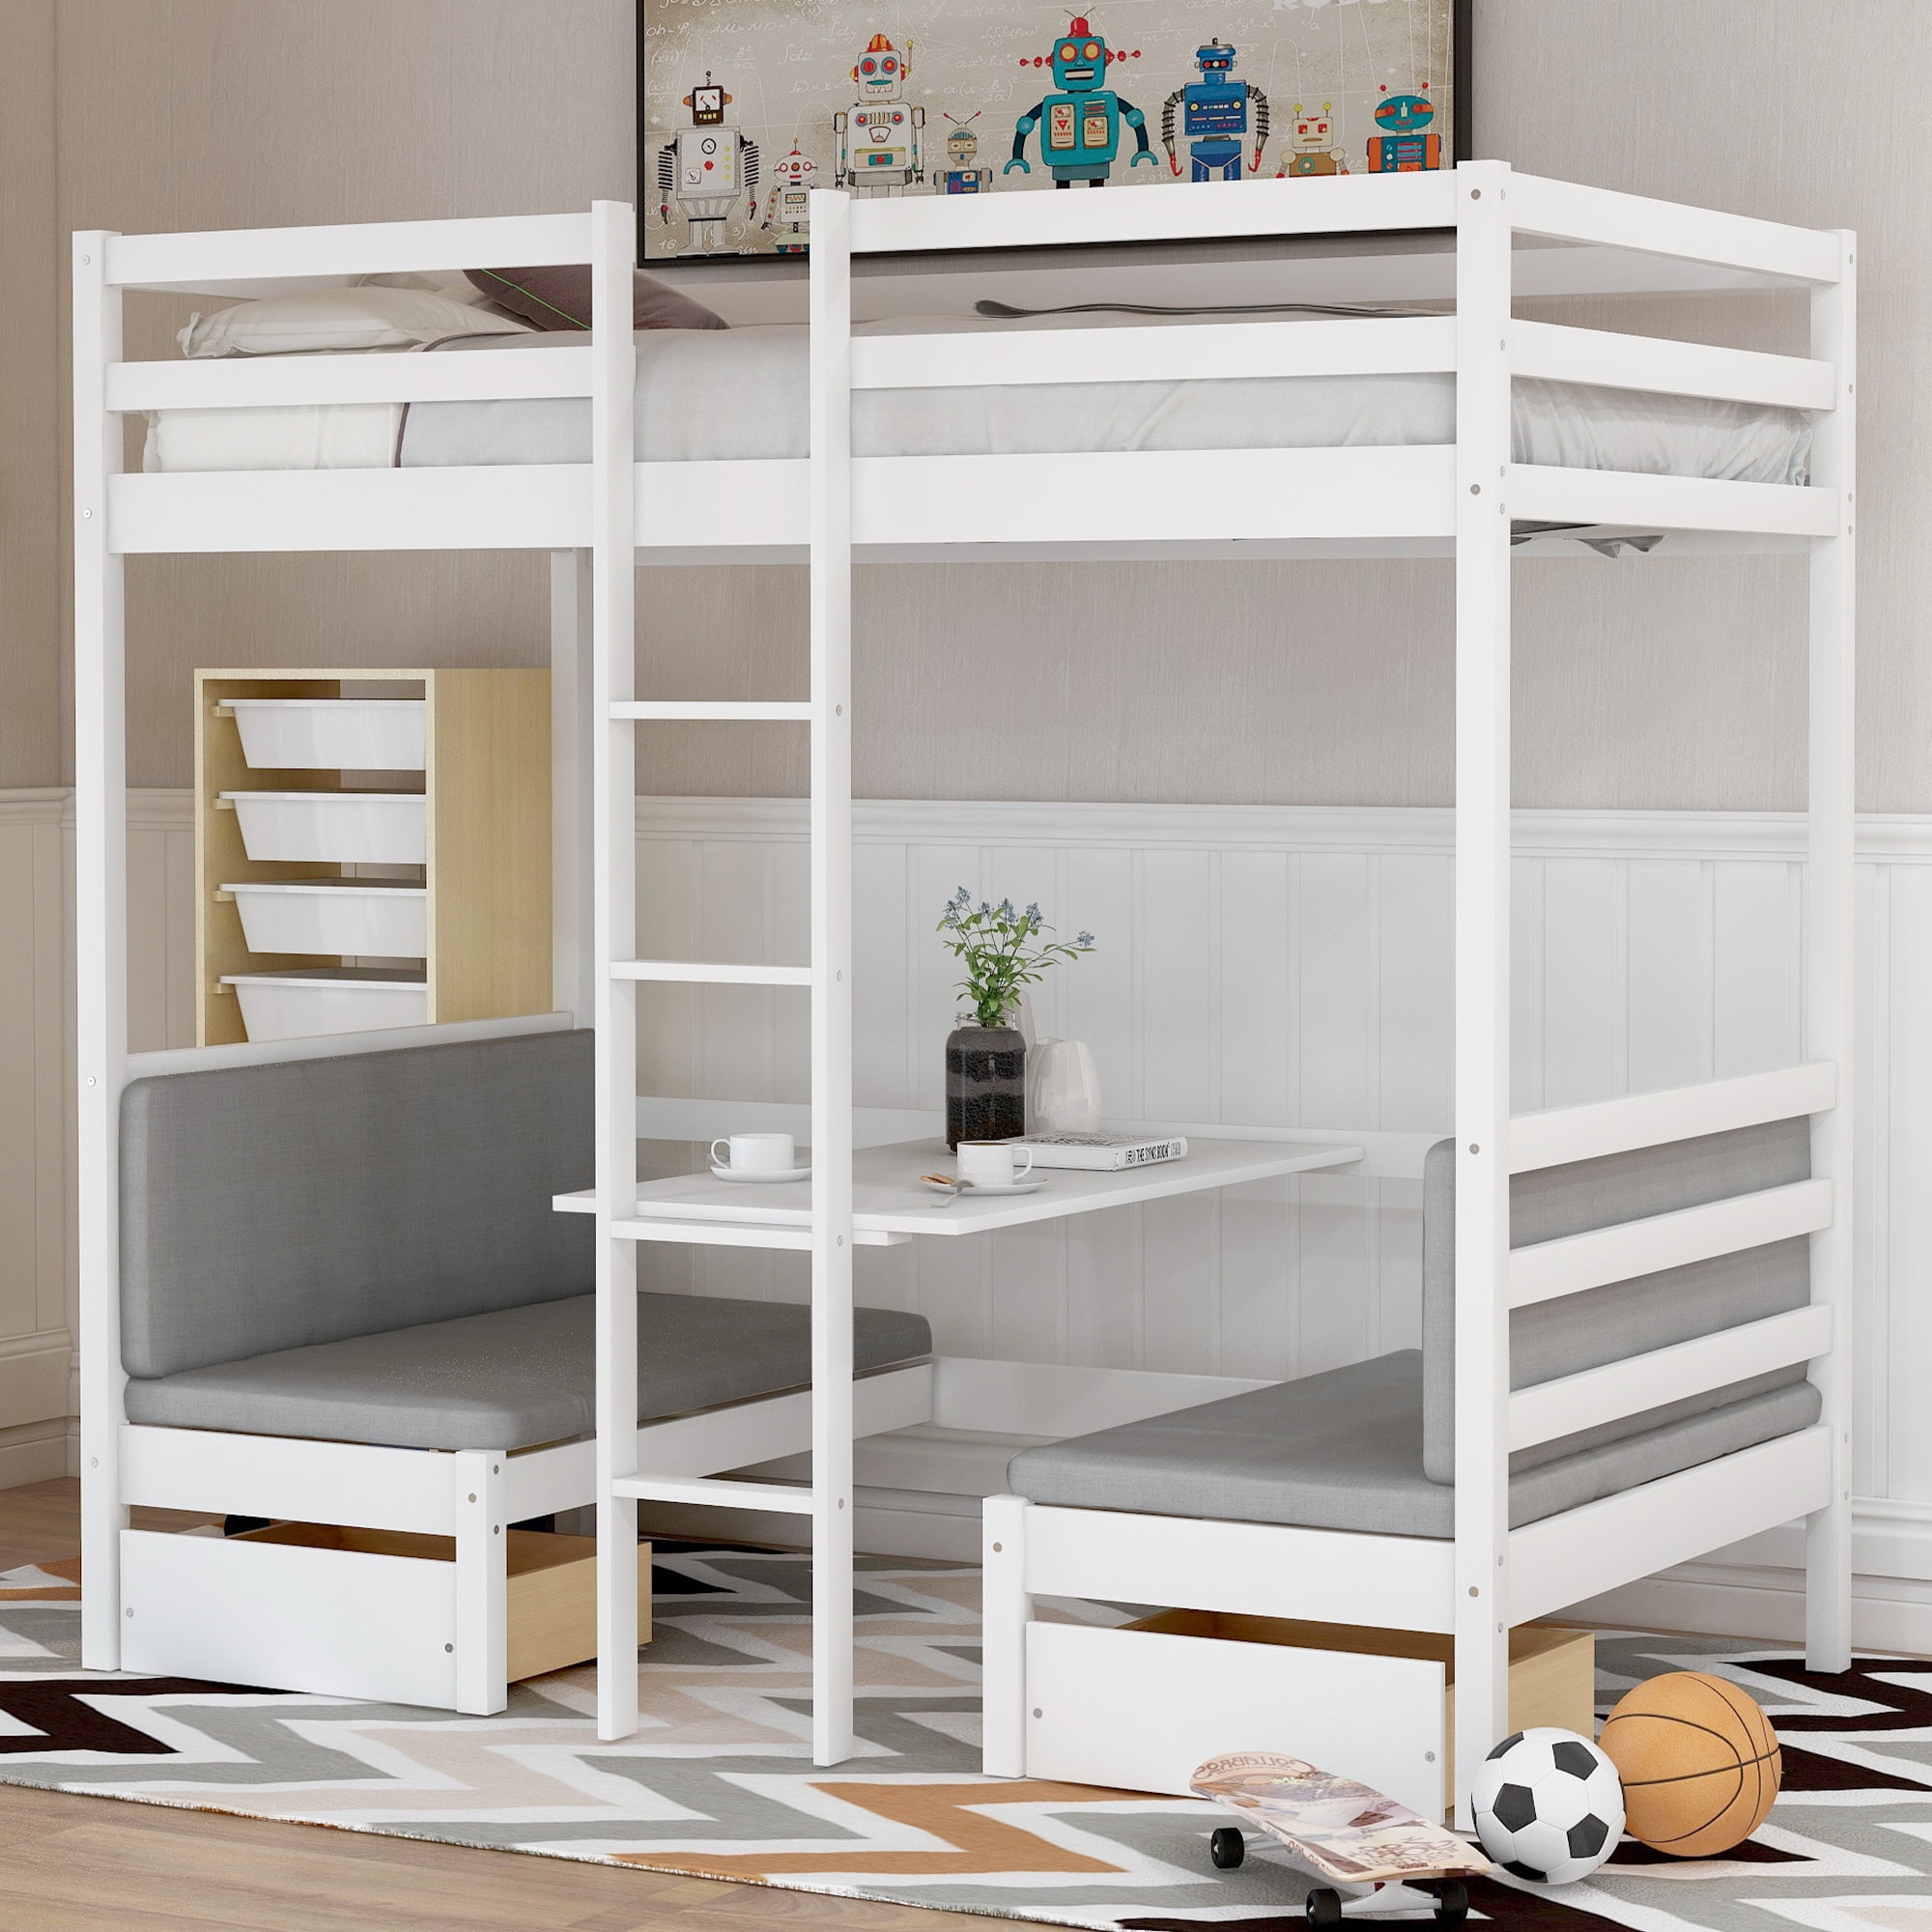 Euroco Solid Wood Convertible Twin Bunk, Twin Loft Bunk Bed With Futon Chair And Desk